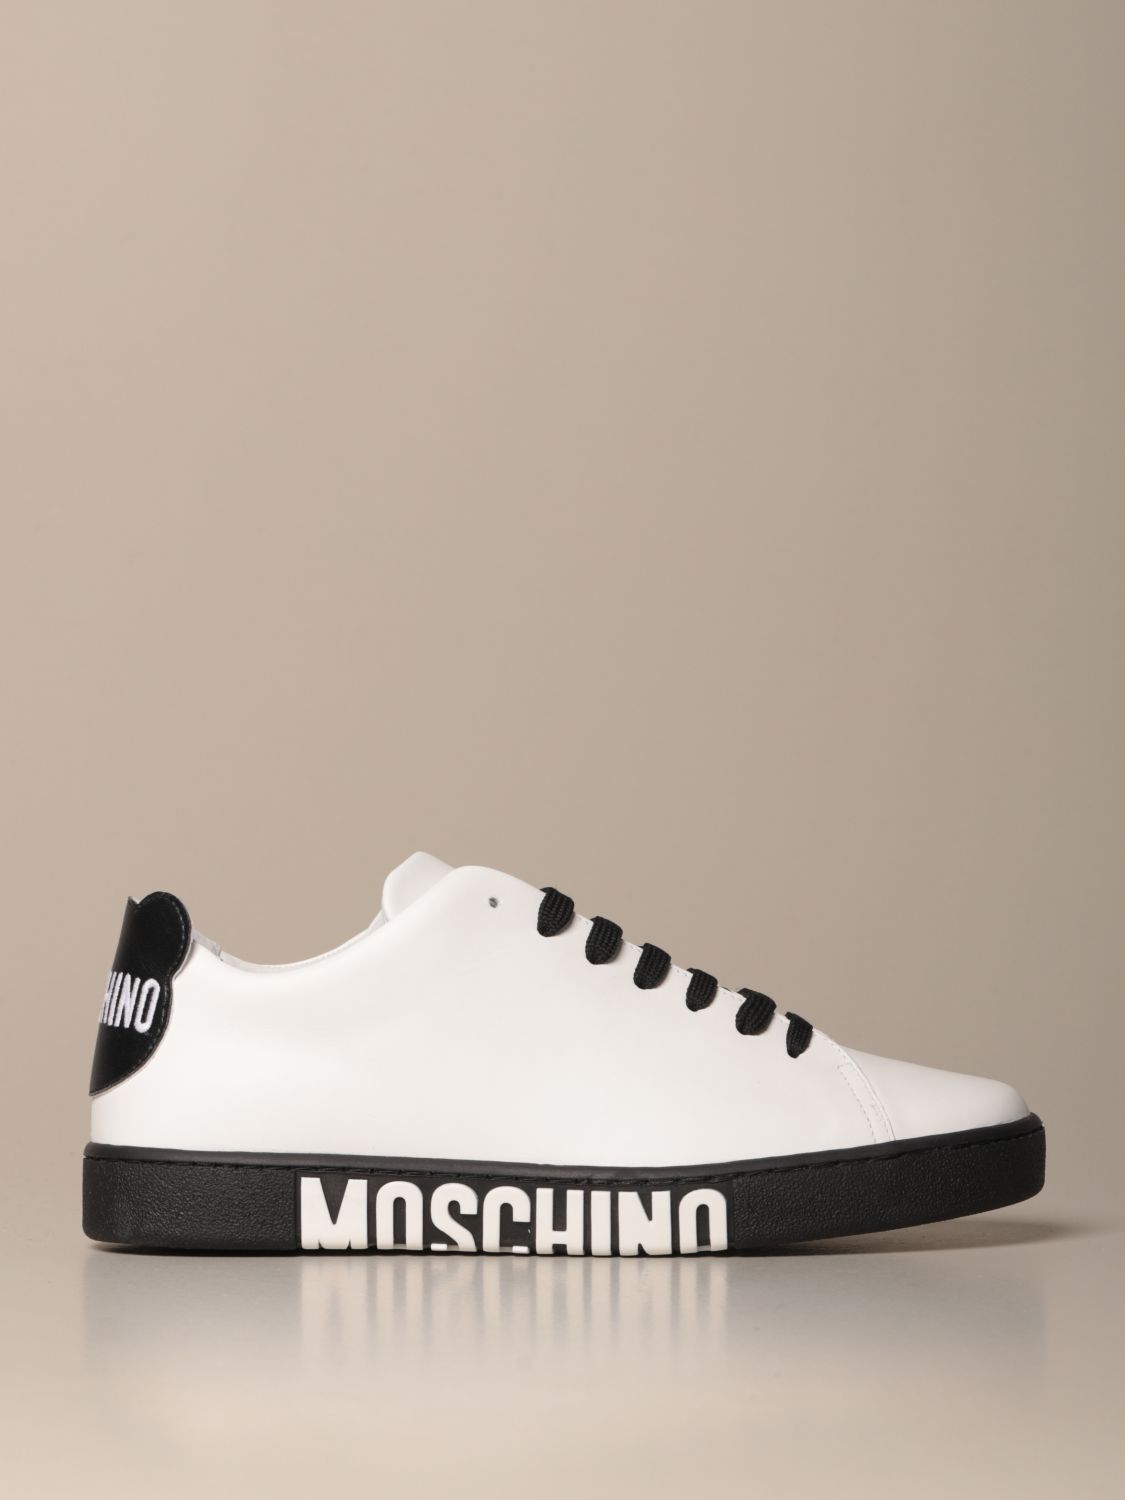 moschino sneakers mens